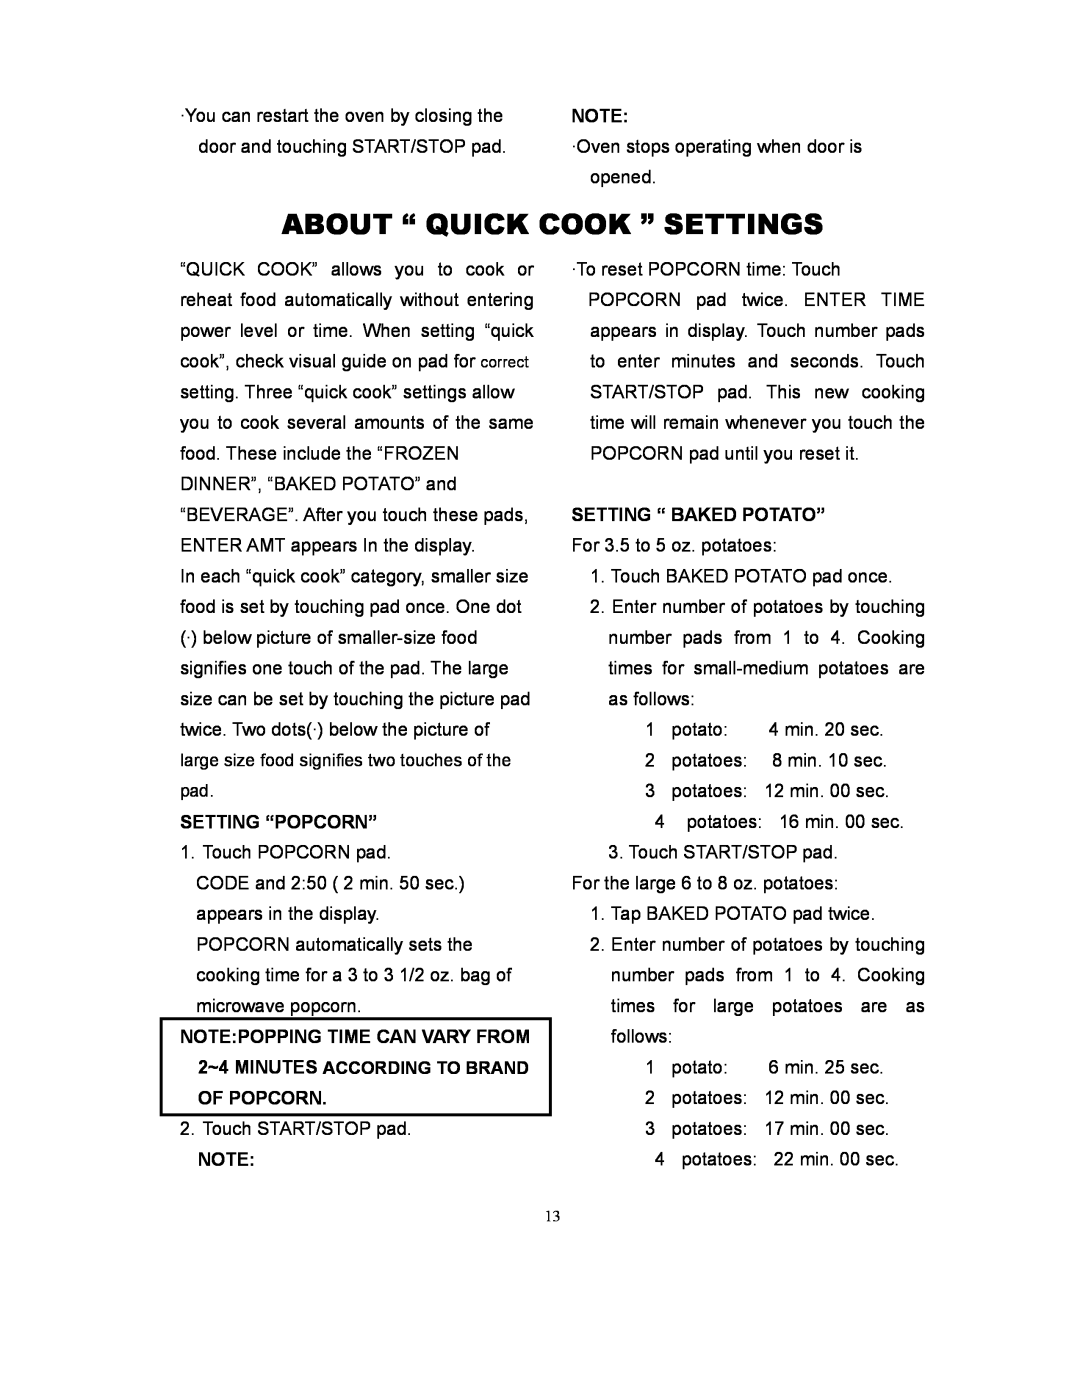 Magic Chef MCD775W owner manual About “ Quick Cook ” Settings, Setting “Popcorn”, Setting “ Baked Potato” 